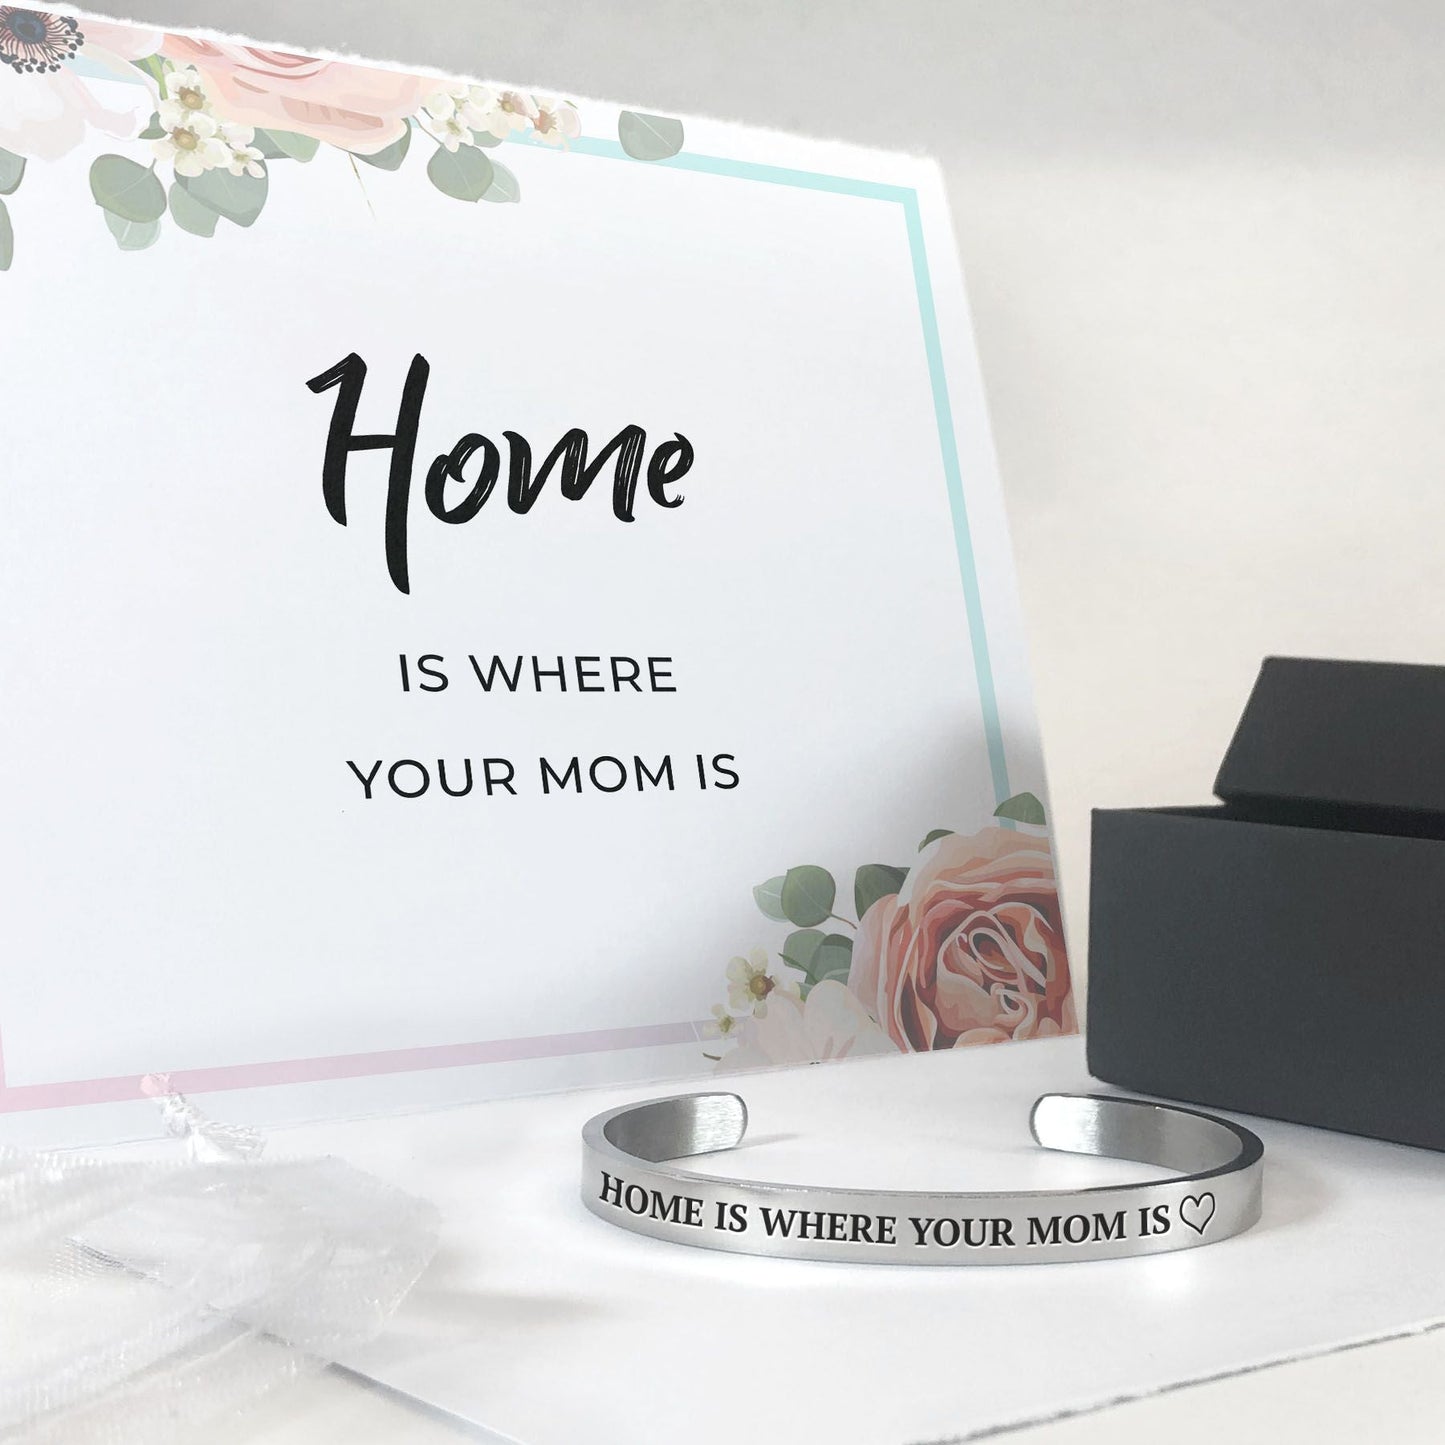 Home is where your mom is bracelet in silver with a gift box, bag, and card in the background